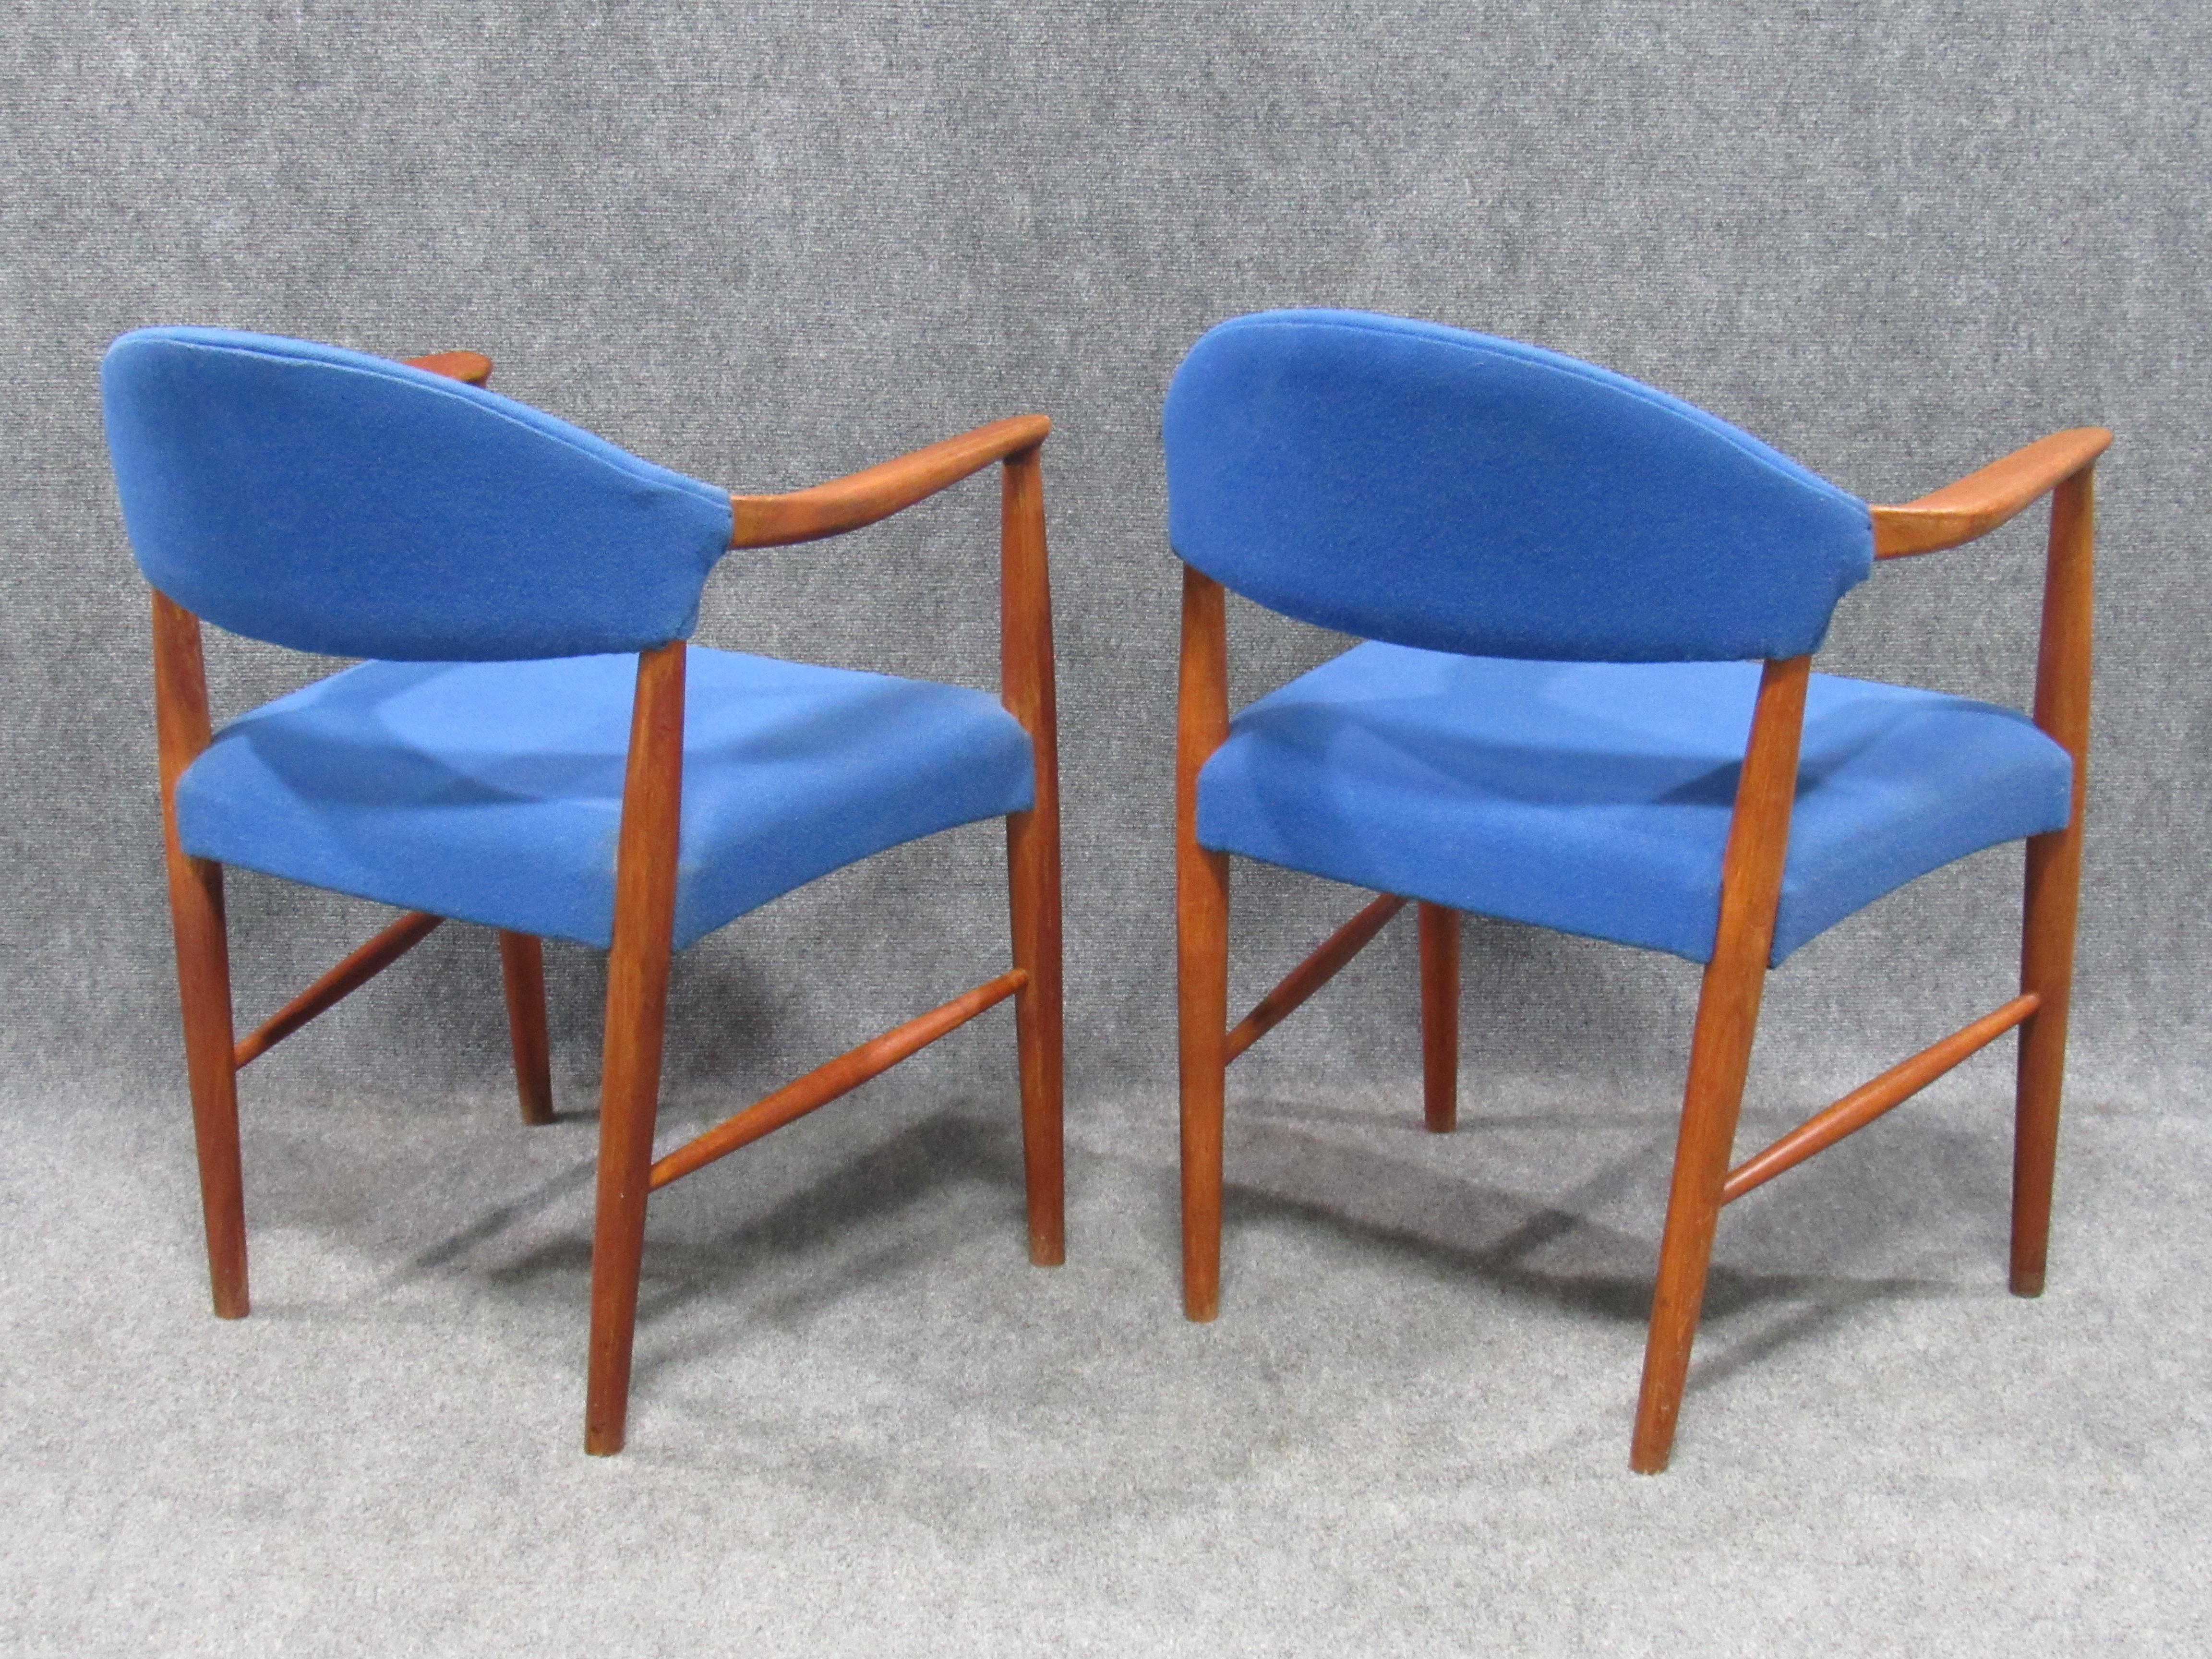 Danish Mid-Century Modern Teak and Blue Wool Armchairs Attributed to Hans Wegner For Sale 8